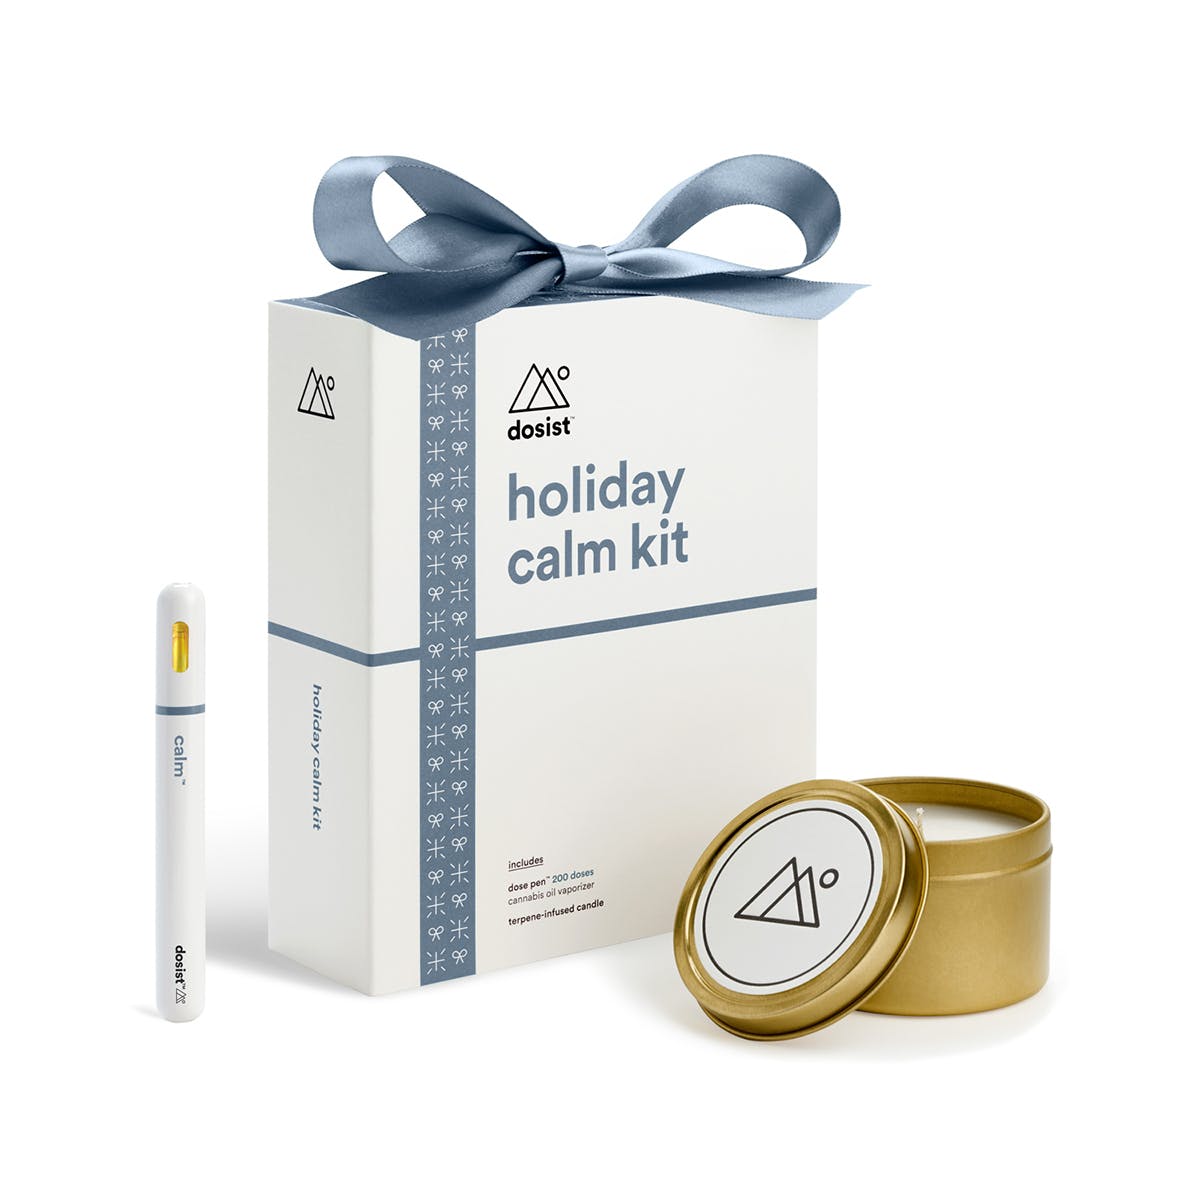 Holiday calm kit by dosist™